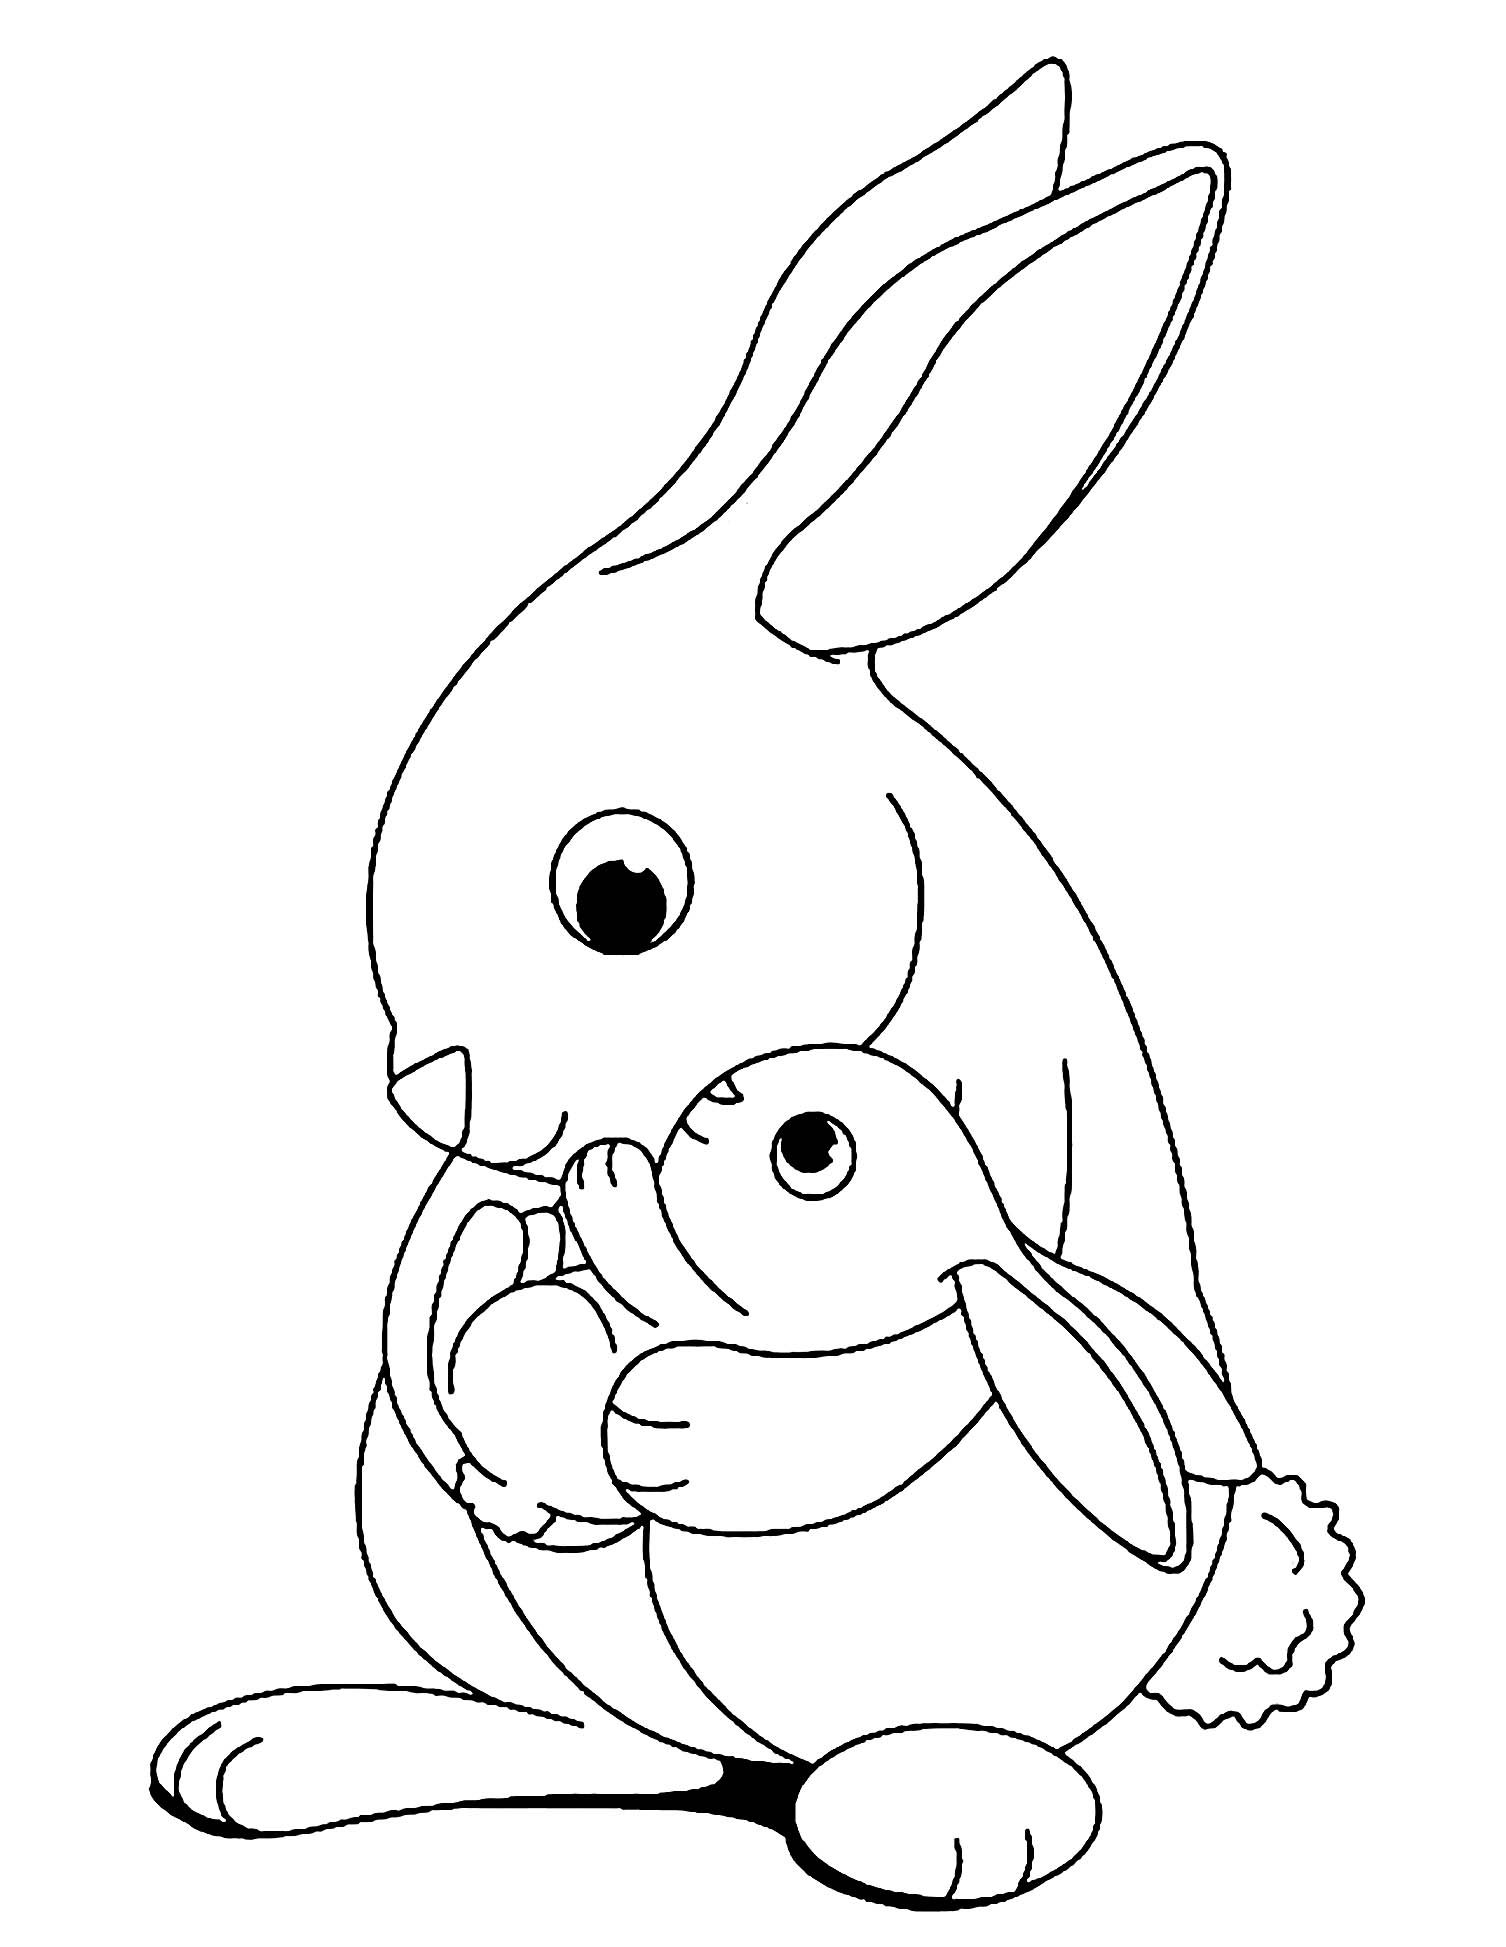 Free Rabbit &Amp; Bunny Coloring Pages To Color - Rabbits &Amp; Bunnies Kids